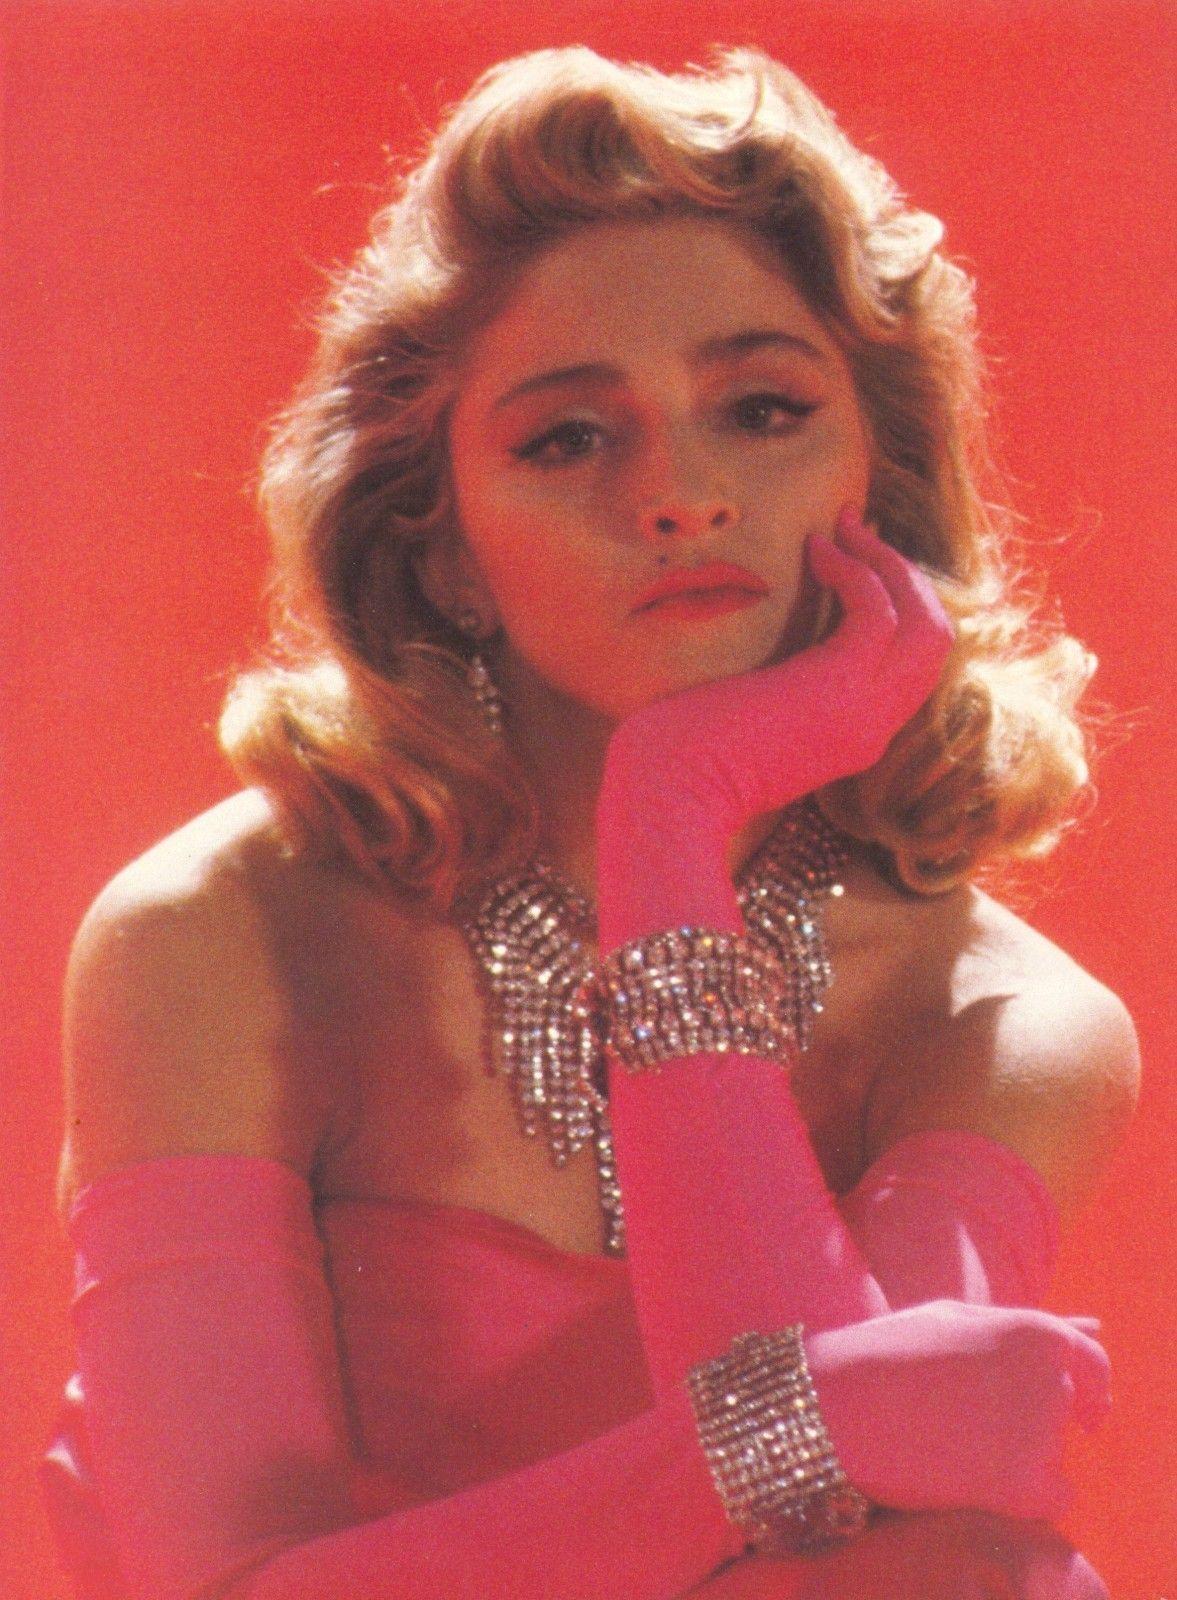 Madonna in Material Girl music video, 1984